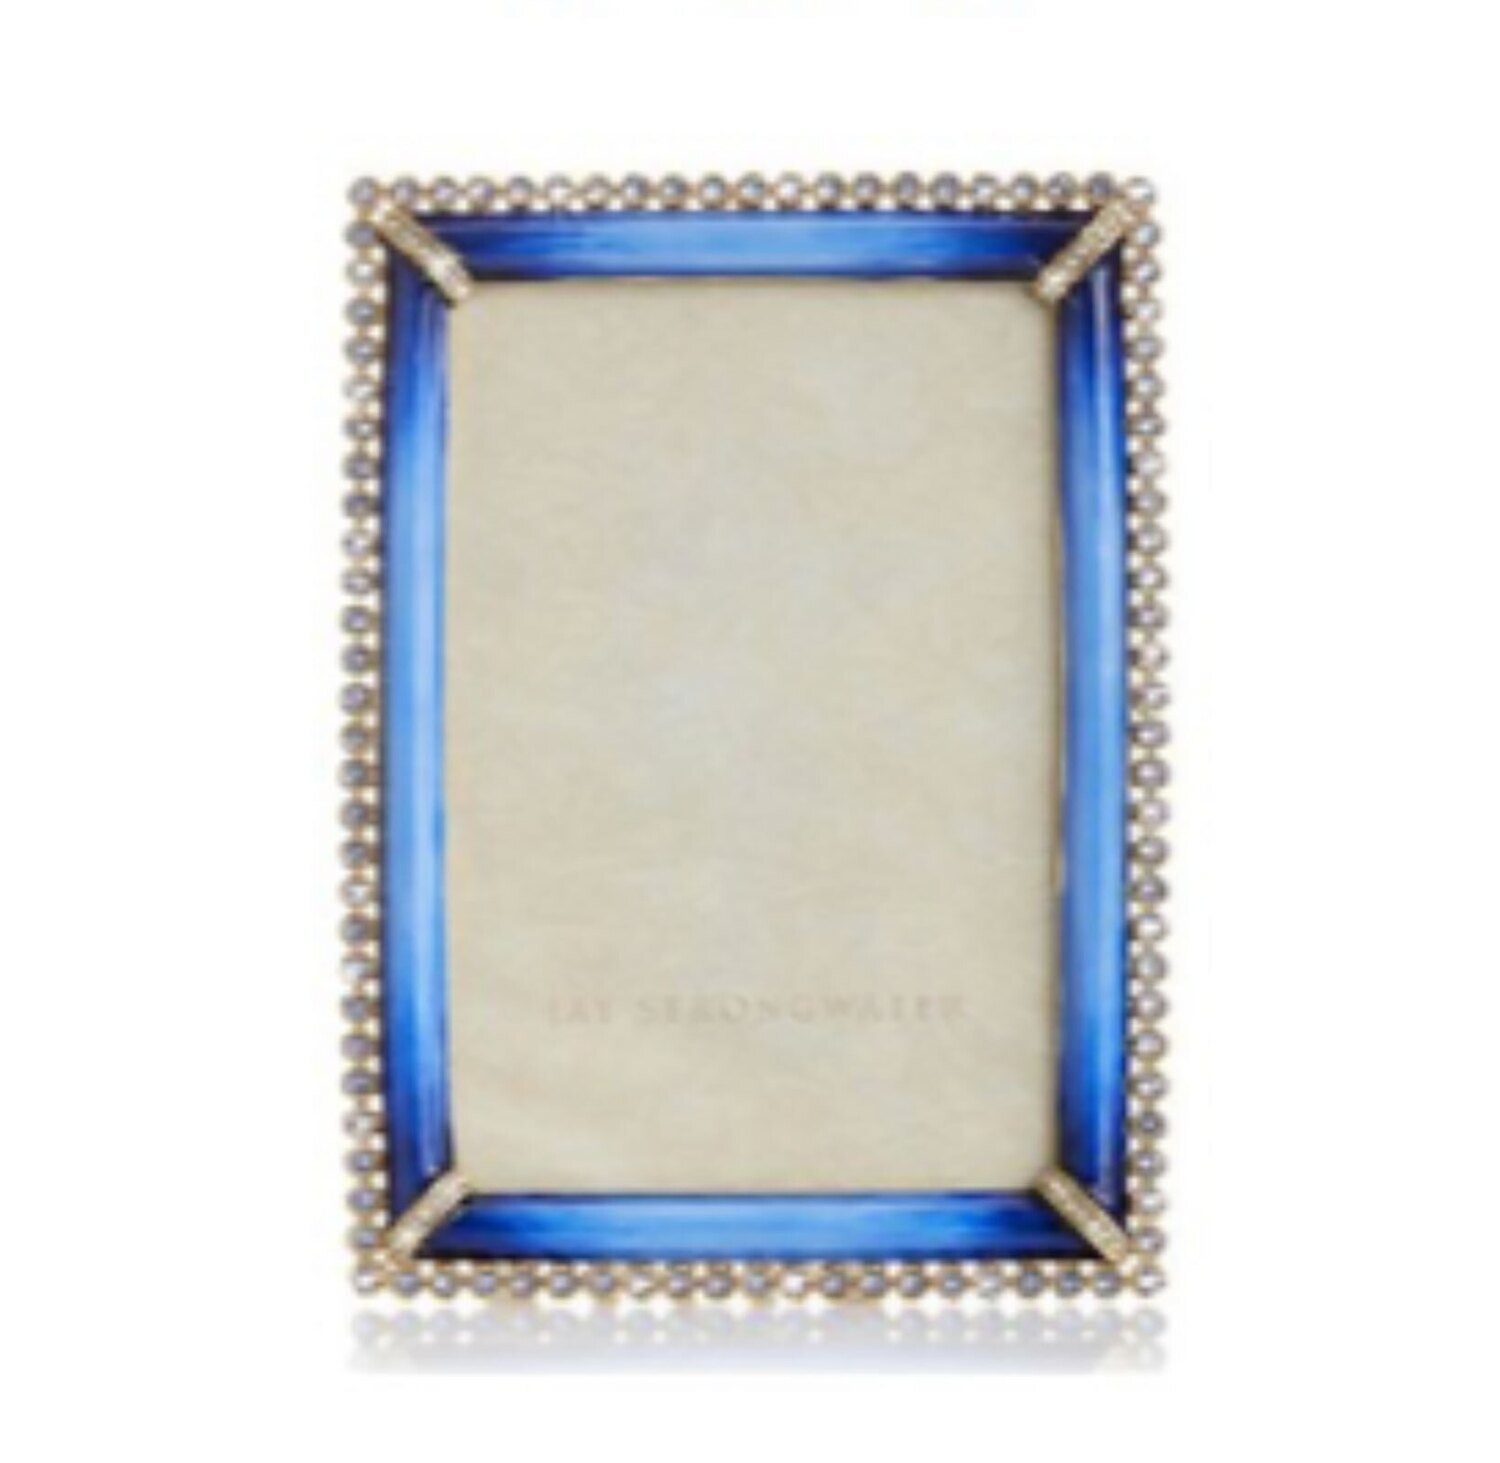 Jay Strongwater Stone Edge 4" x 6" Picture Frame SPF5510-261